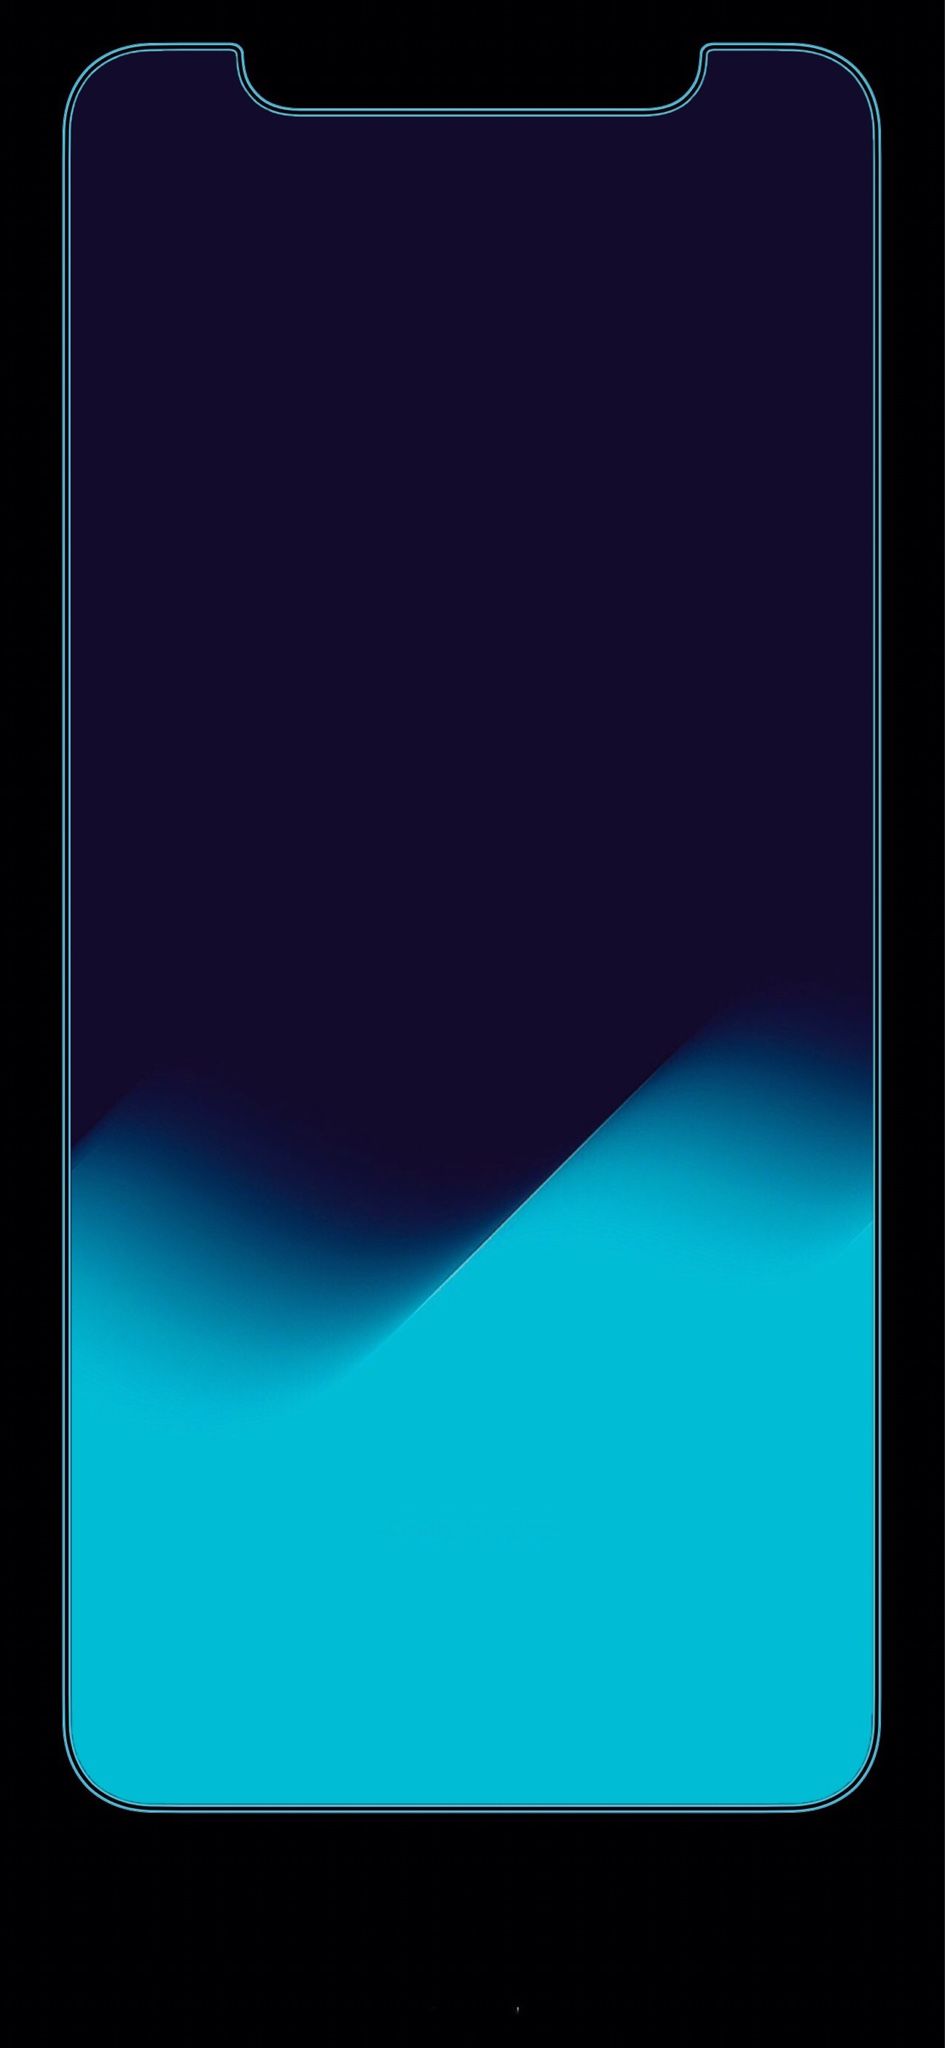 Download Blueprint Wallpapers For iPhone 11 Pro iPhone XS And iPhone X In  Multiple Colors  iOS Hacker